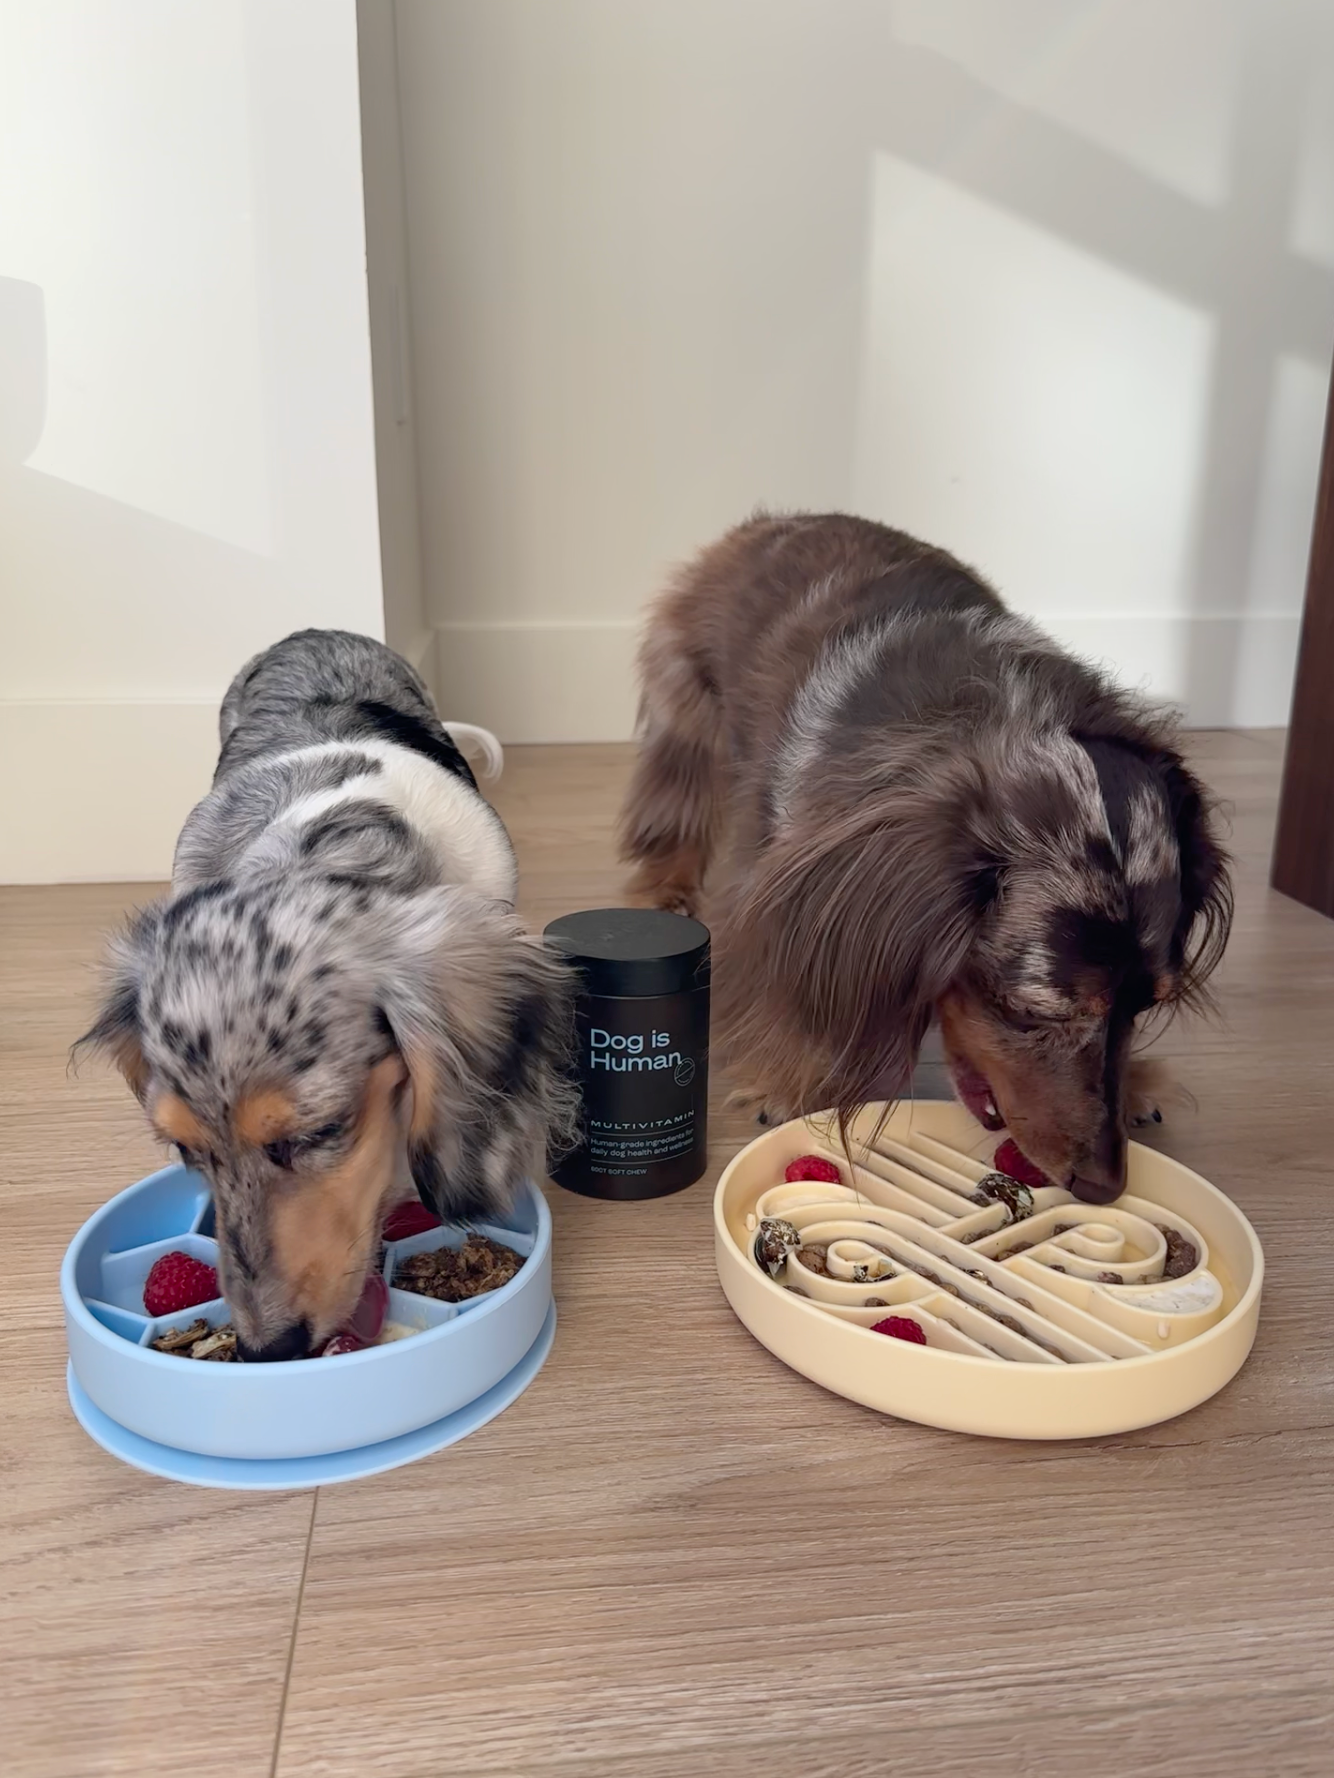 Two Dachshunds eat side by side from slow-feeder bowls with a jar of dog multivitamins between them. The dog on the right is tan and white with black spots and the dog on the right is various shades of brown with white-ish black spots. They eat from blue and yellow bowls, respectively.